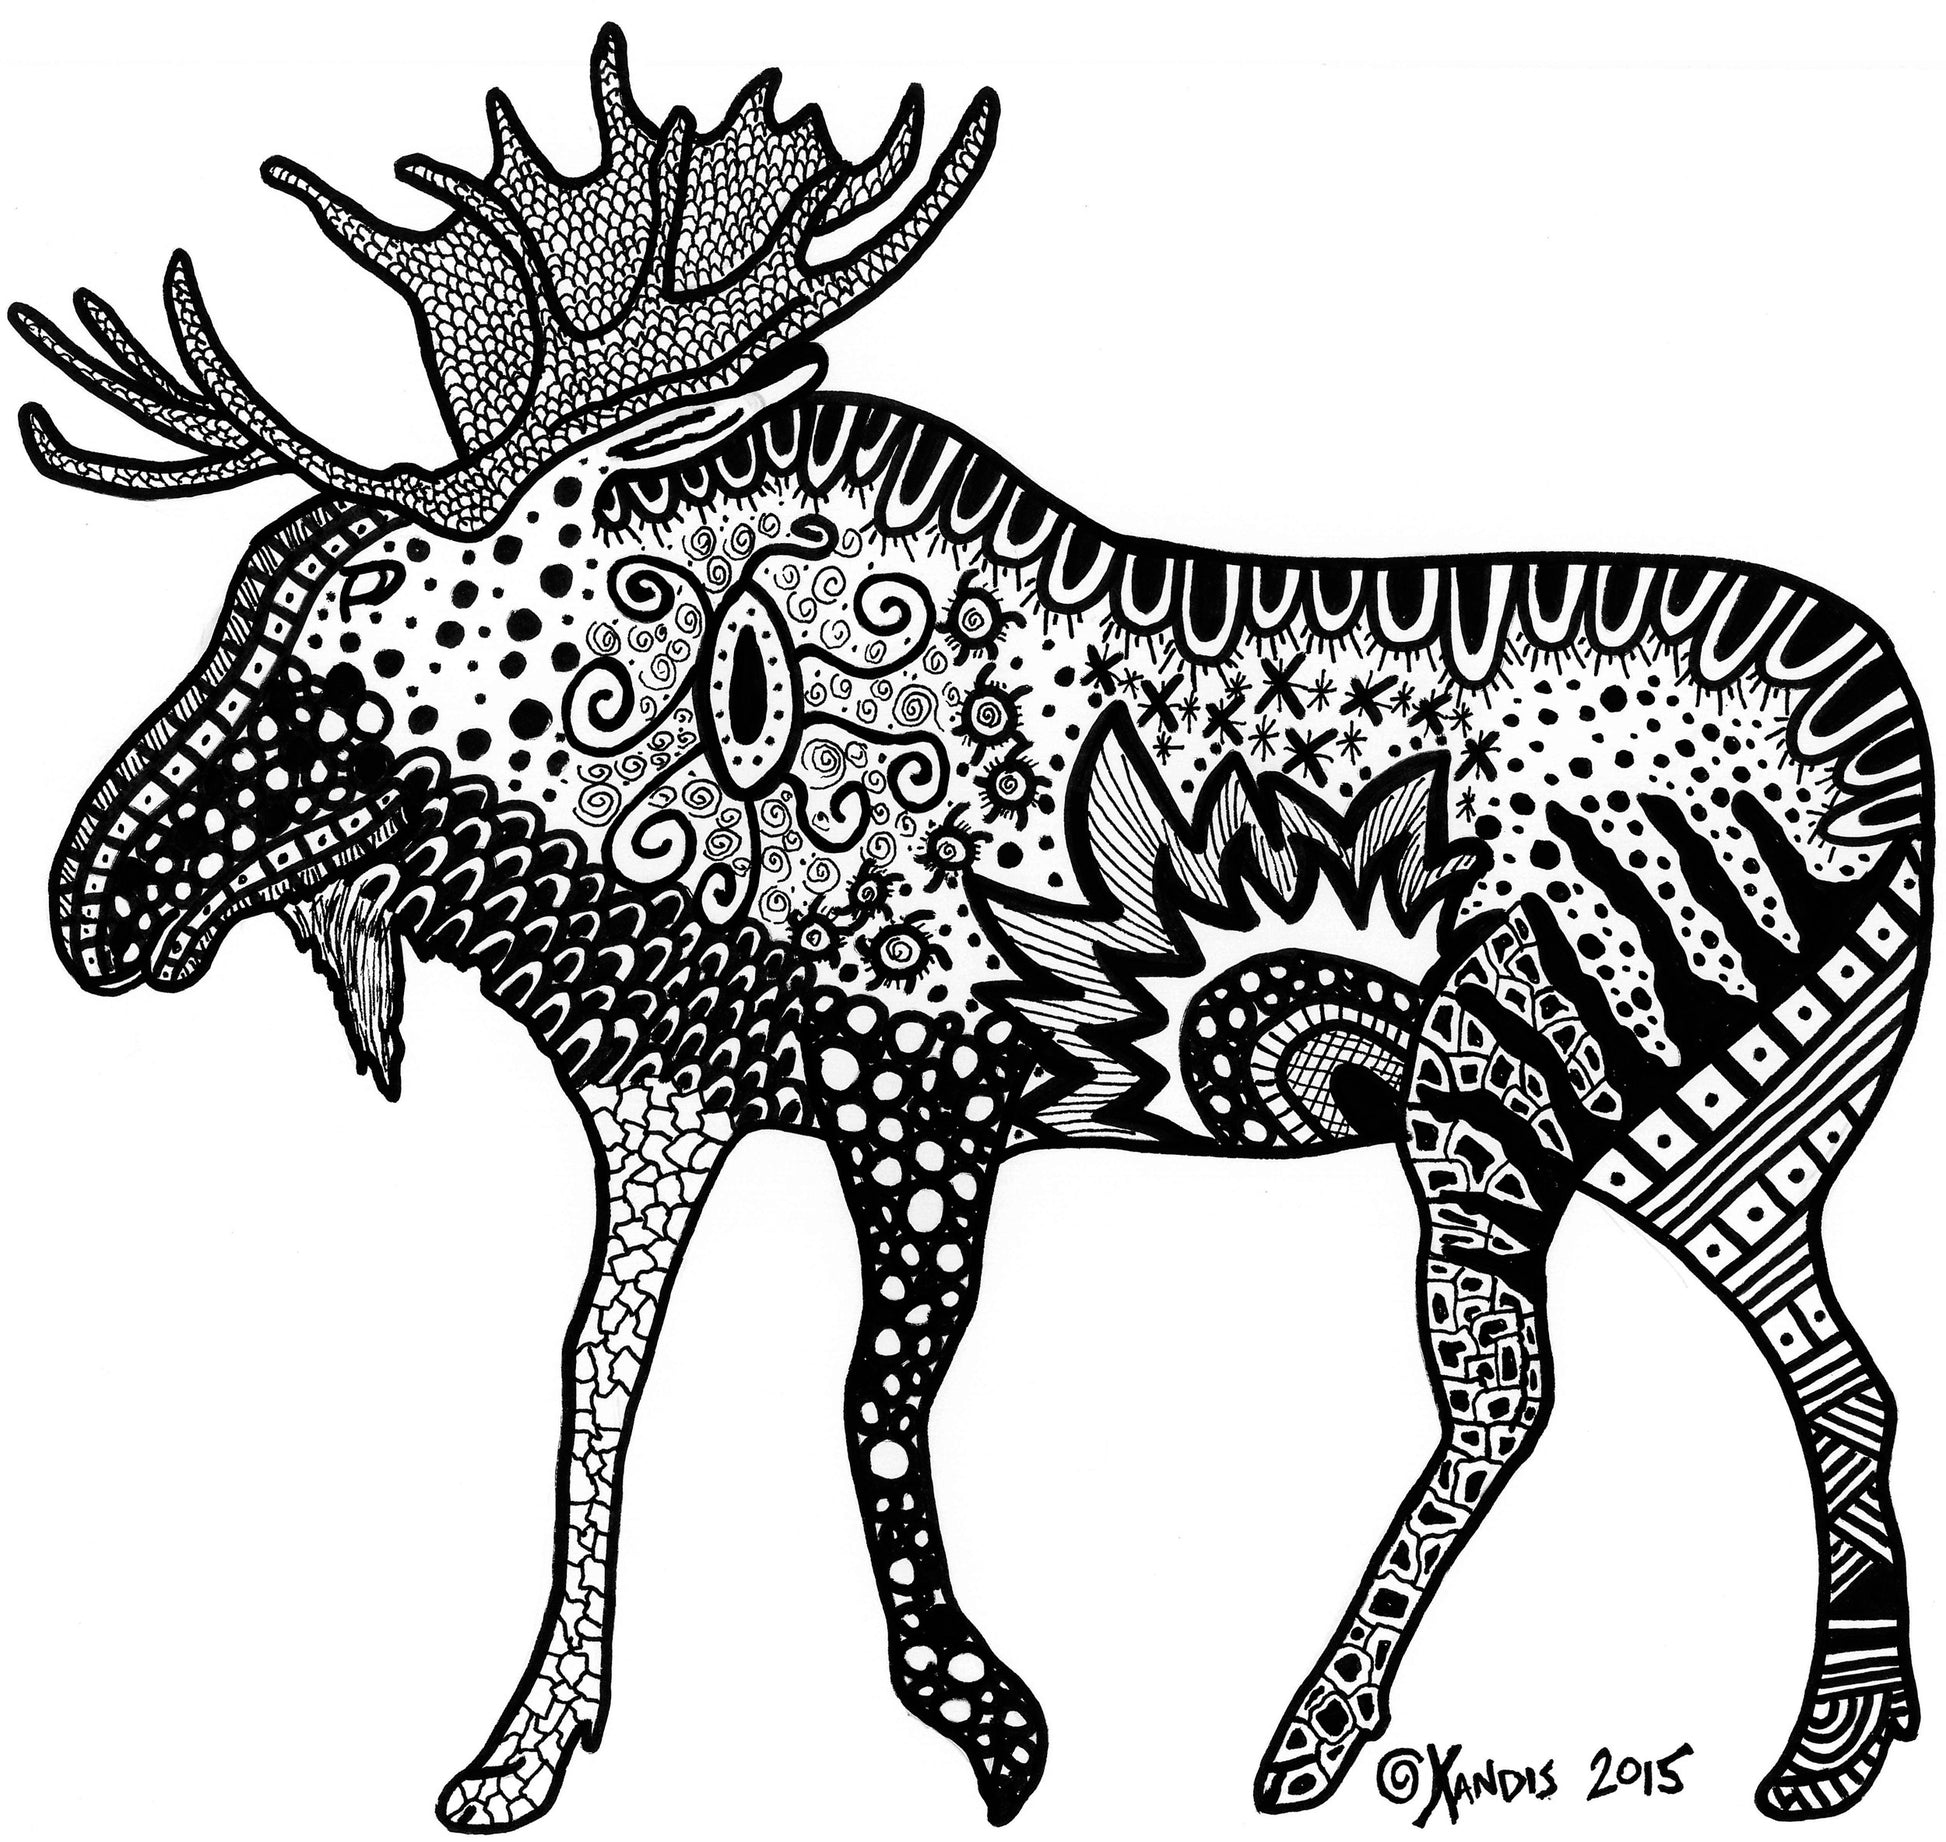 Moose black and white, tattoo drawing sticker